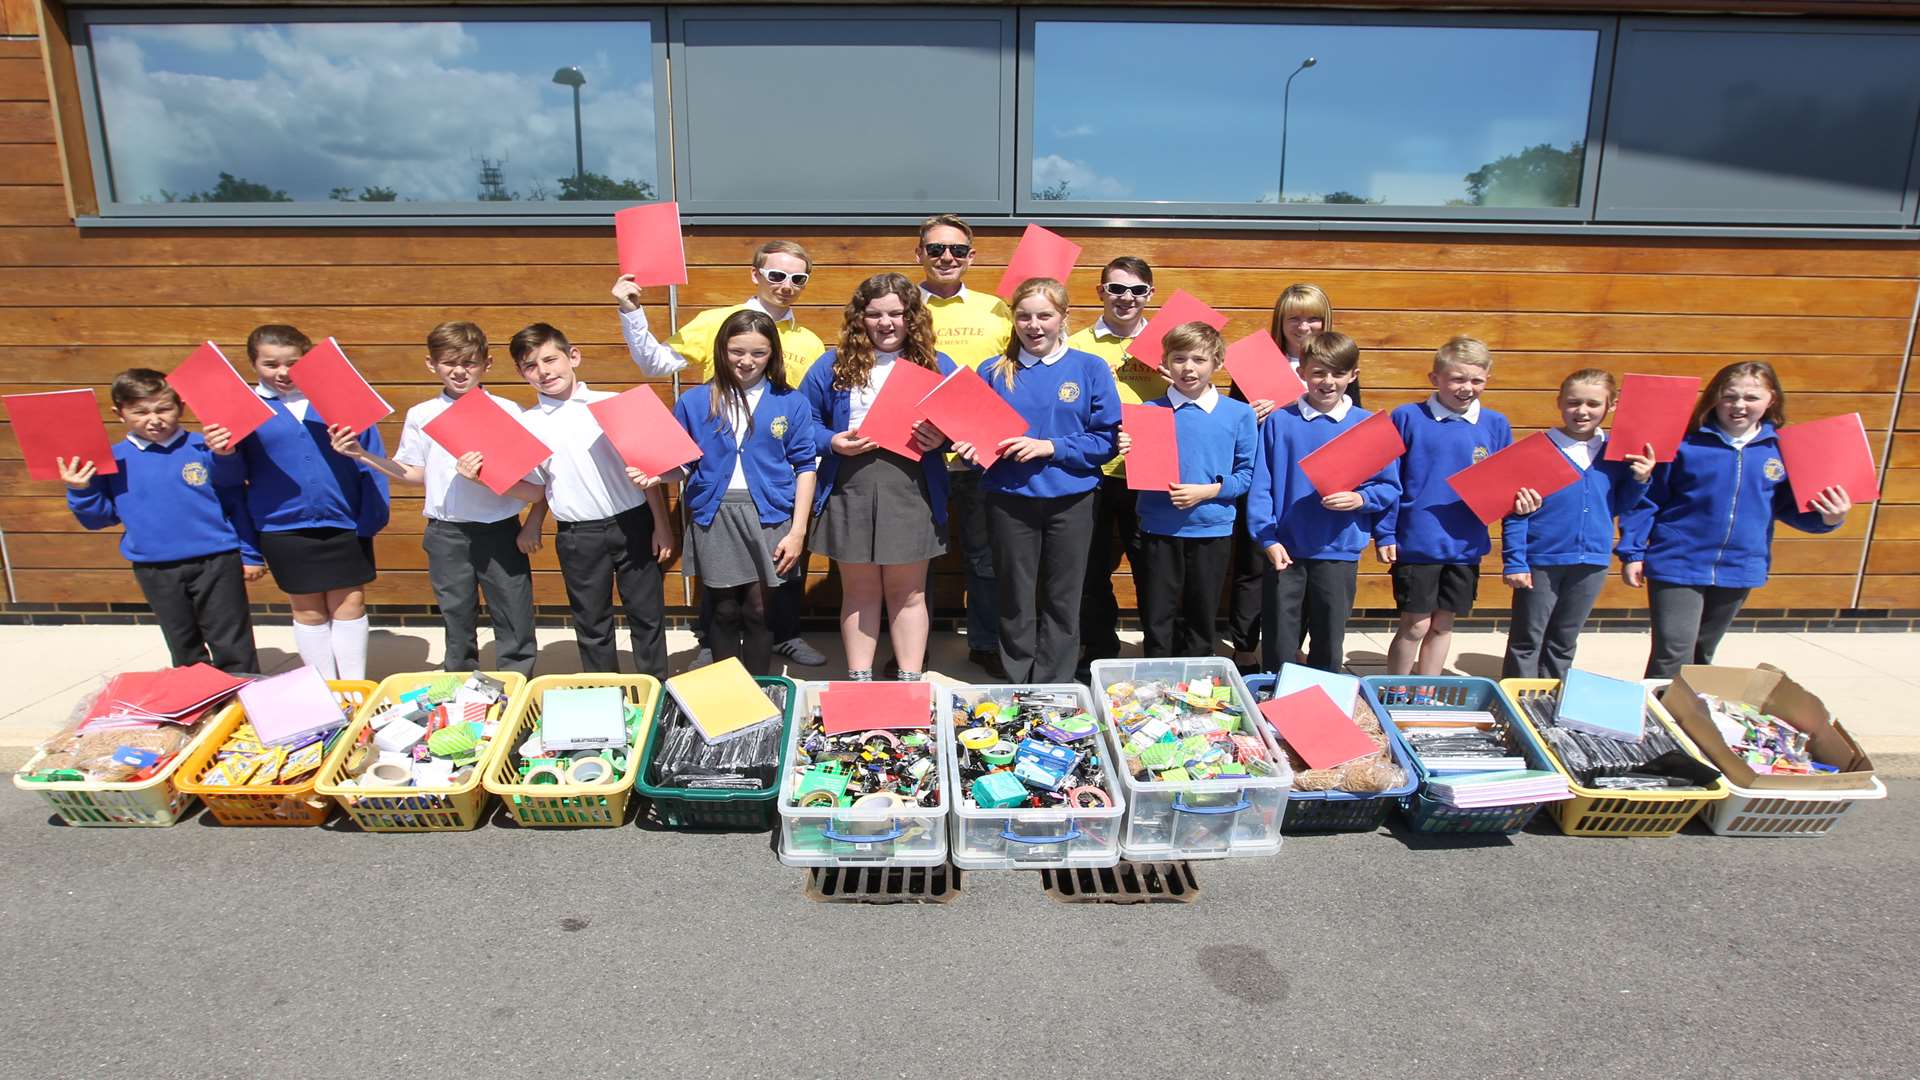 Joe Mitchell, John Brown and Liam Packer, of Coin Castle, have donated 12 boxes of stationary to Eastchurch Primary School St Clements site